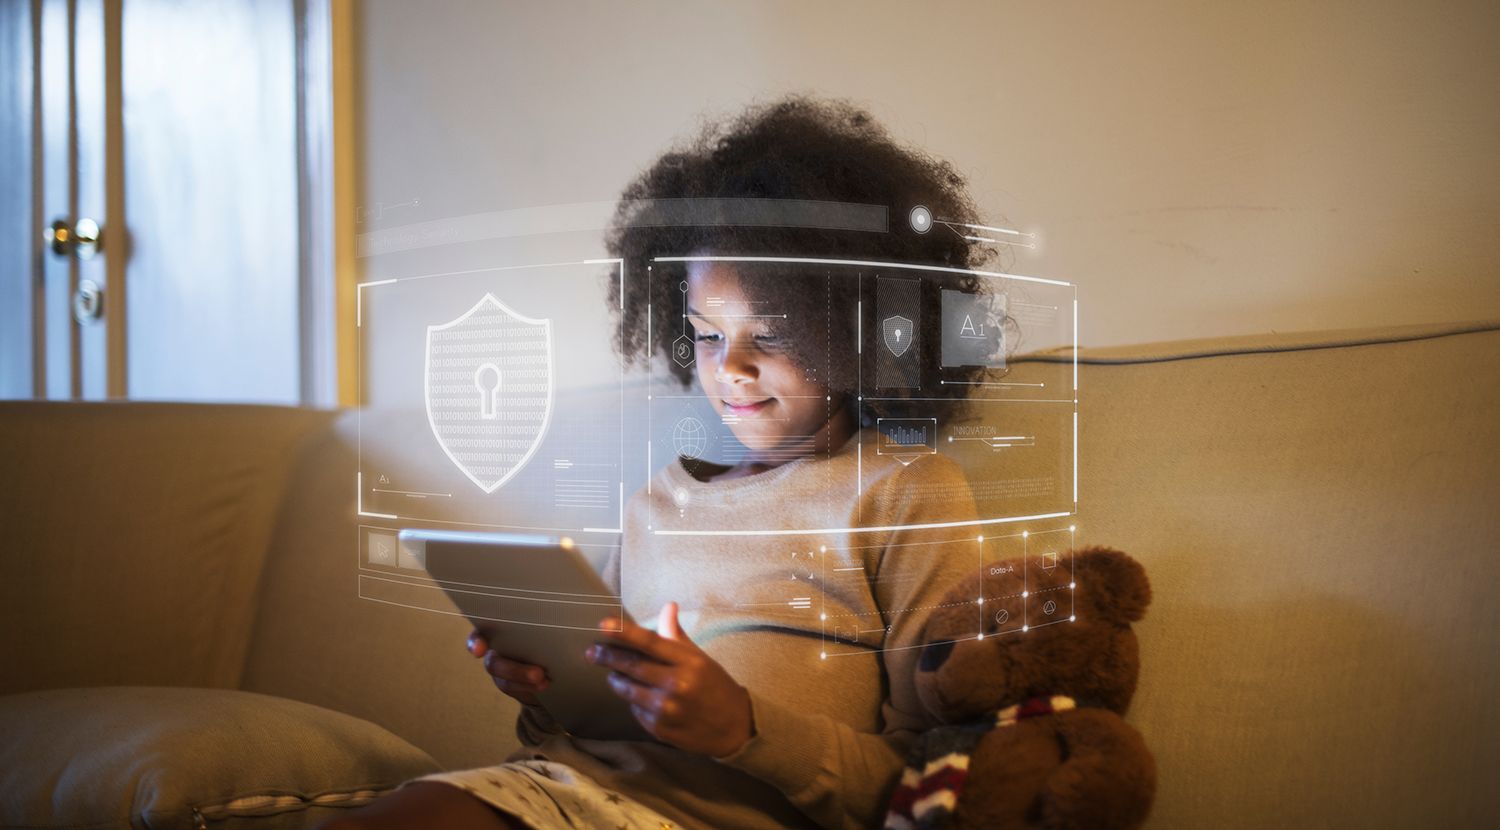 Girl using tablet with cyber security icons overlaid